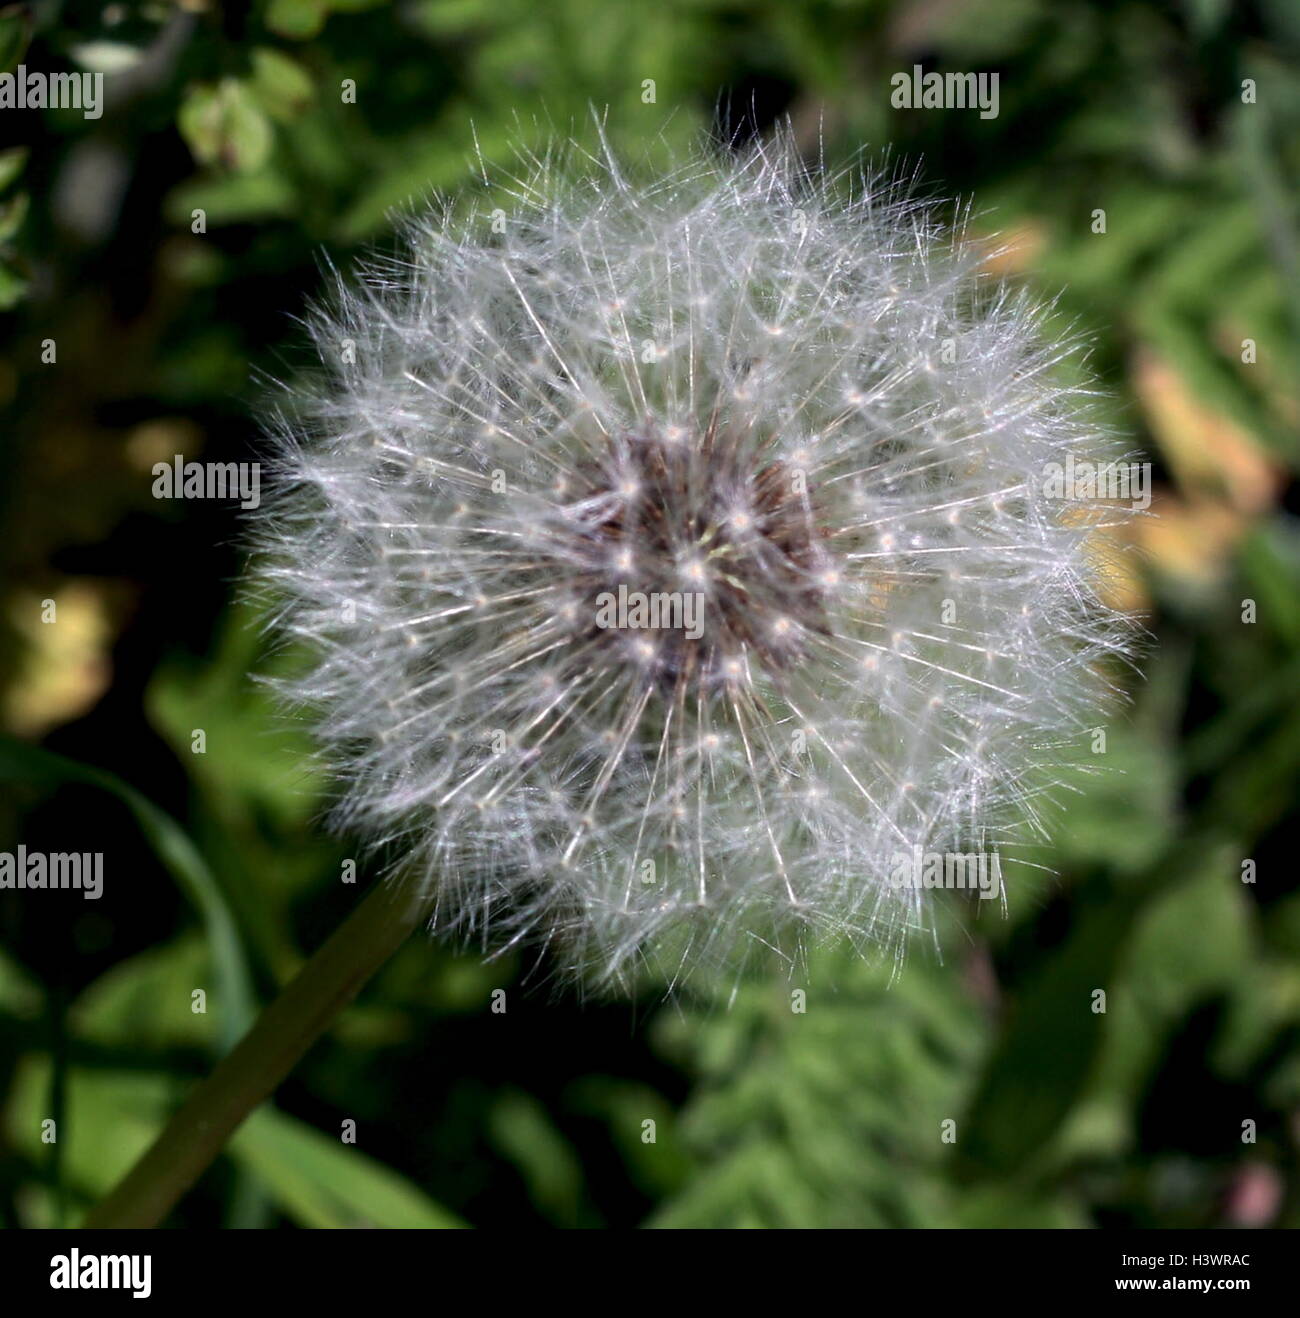 fruits (cypselae) of the Taraxacum officinale, the common dandelion, a flowering herbaceous perennial plant of the family Asteraceae (Compositae). T. officinale is considered a weed, especially in lawns and along roadsides, but it is sometimes used as a medical herb and in food preparation. Stock Photo